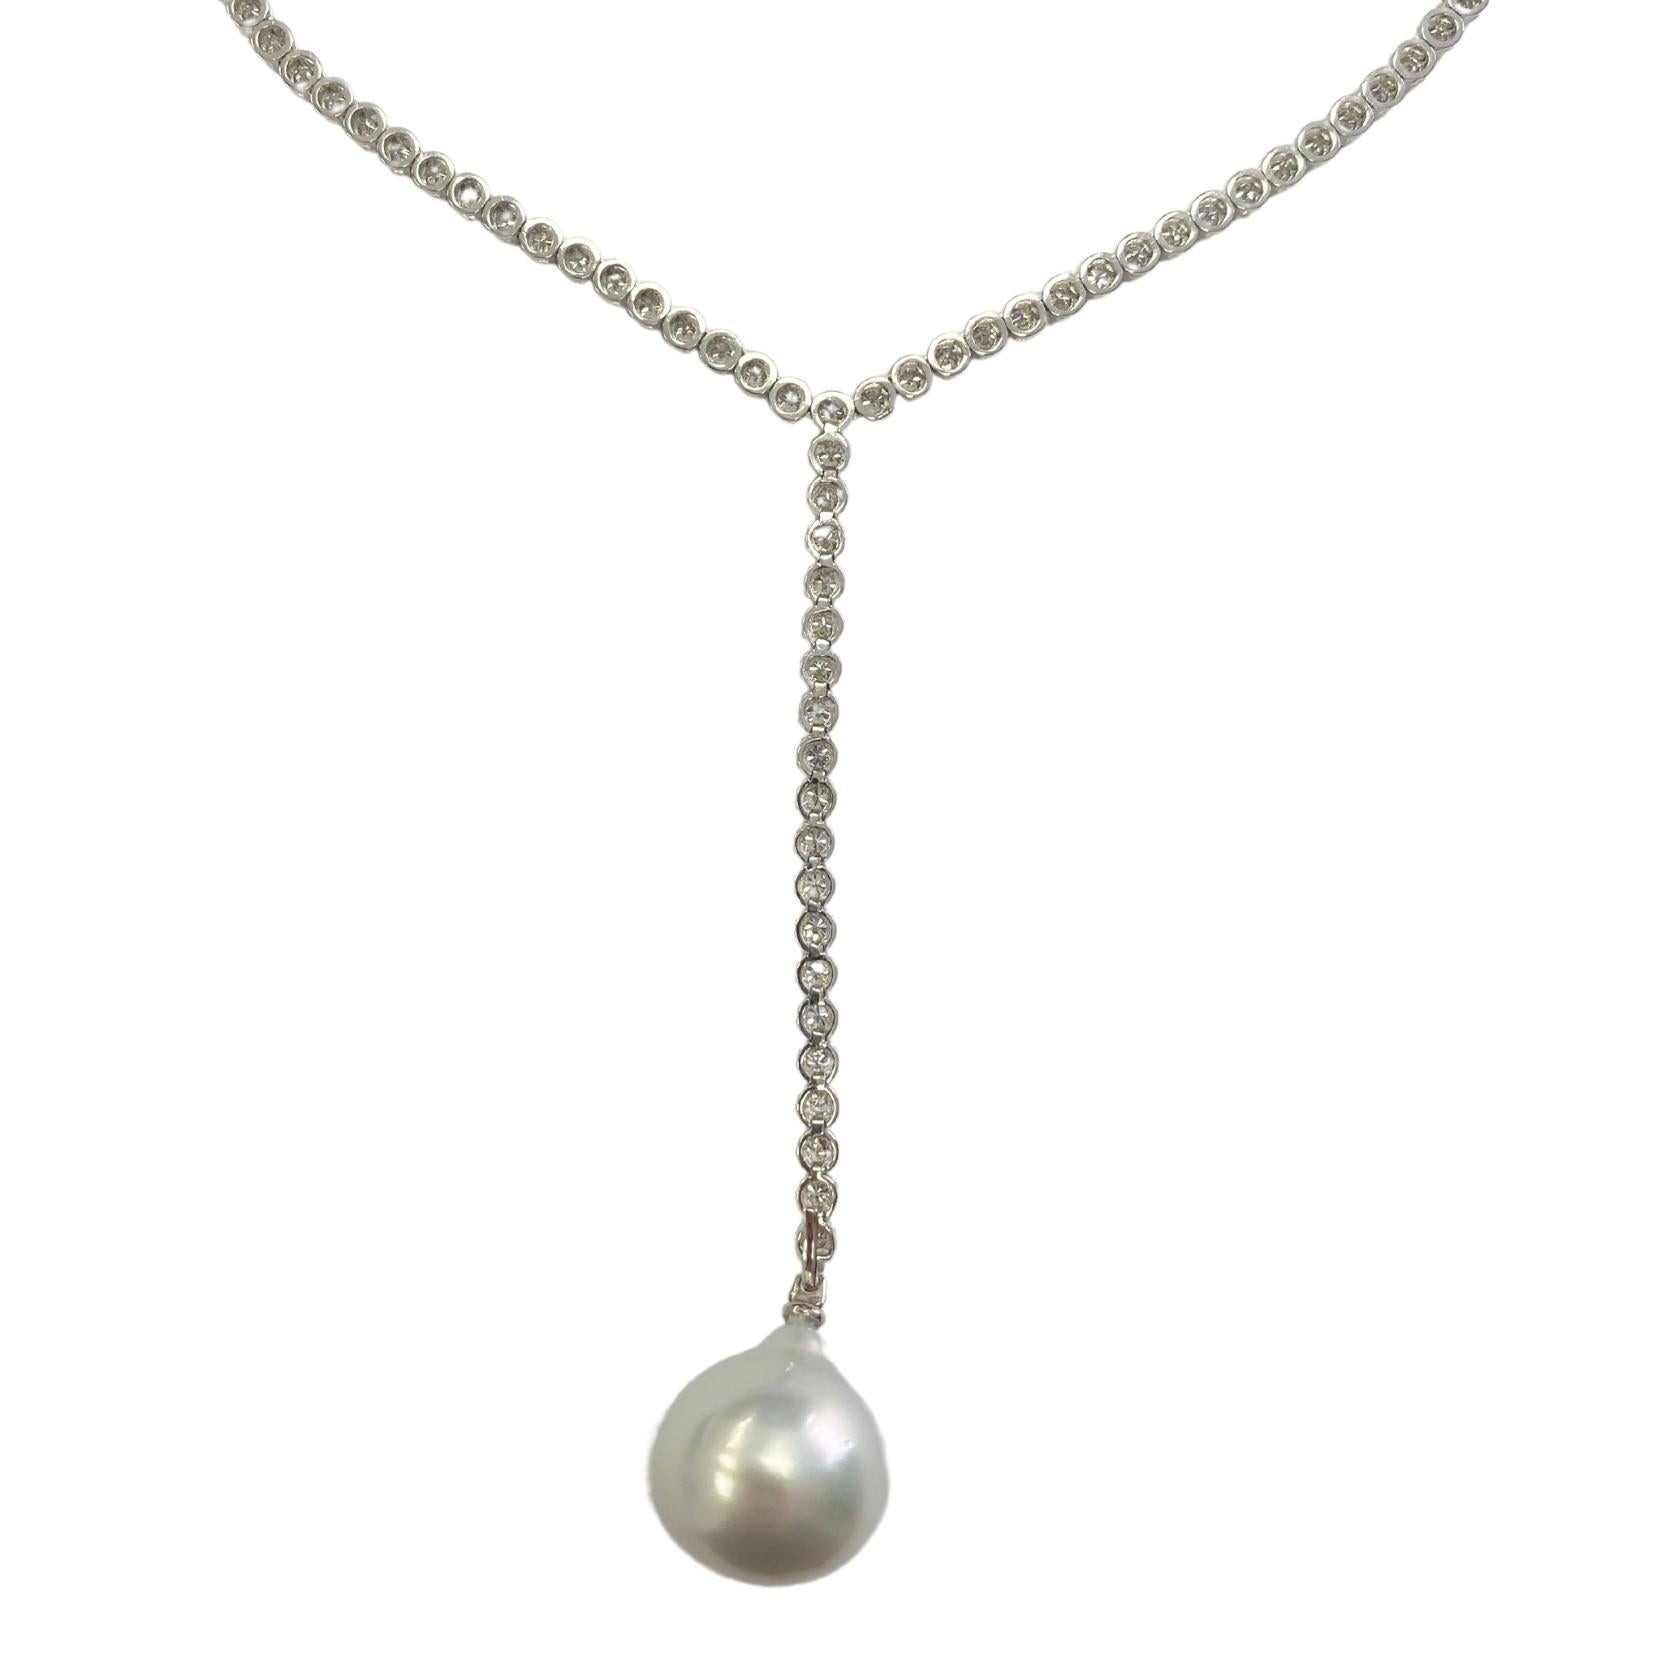 An elegant statement piece. This lavalier necklace contains 2.52 carats of F/G VVS diamonds set into 18-karat white gold and is finished with a 26-carat Australian pearl pendant. The necklace is 42 centimetres long; the drop chain and pearl are 7.5